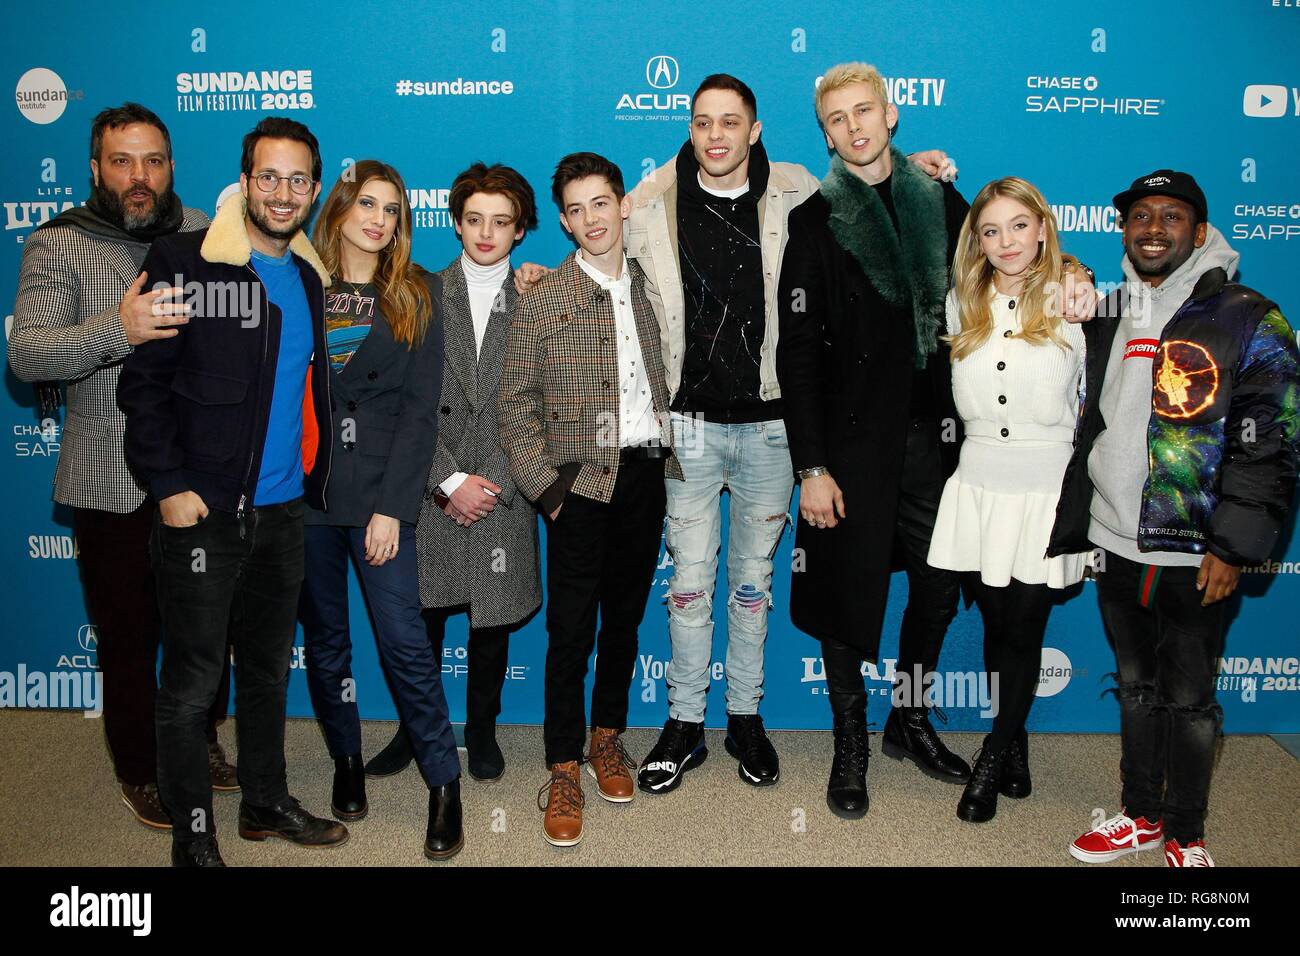 Park City, UT, USA. 28th Jan, 2019. Jeremy Garelick, Jason Orley, Emily Arlook, Thomas Barbusca, Griffin Gluck, Pete Davidson, Colson Baker (aka 'Machine Gun Kelly'), Sydney Sweeney, Jordan Rock at arrivals for BIG TIME ADOLESCENCE Premiere at Sundance Film Festival 2019, George S. and Dolores Eccles Center for the Performing Arts, Park City, UT January 28, 2019. Credit: JA/Everett Collection/Alamy Live News Stock Photo